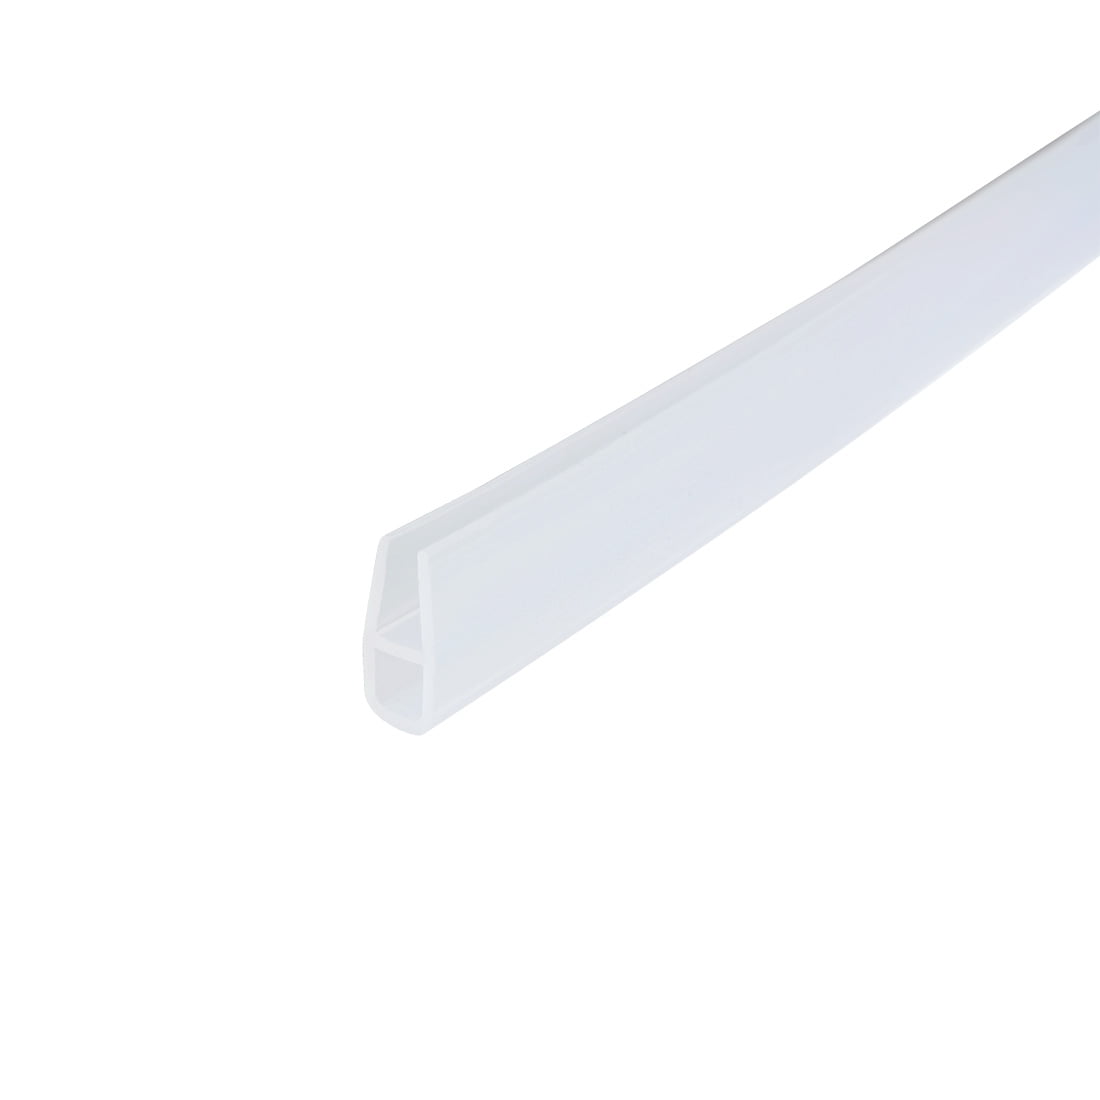 5 or 6mm Glass Straight Soft h Fin Shape FIN007-25 90cm 140cm or 2m Long Seals Gaps of Up to 25mm Doors or Panels 90cm Shower Seal for Screens Fits 4